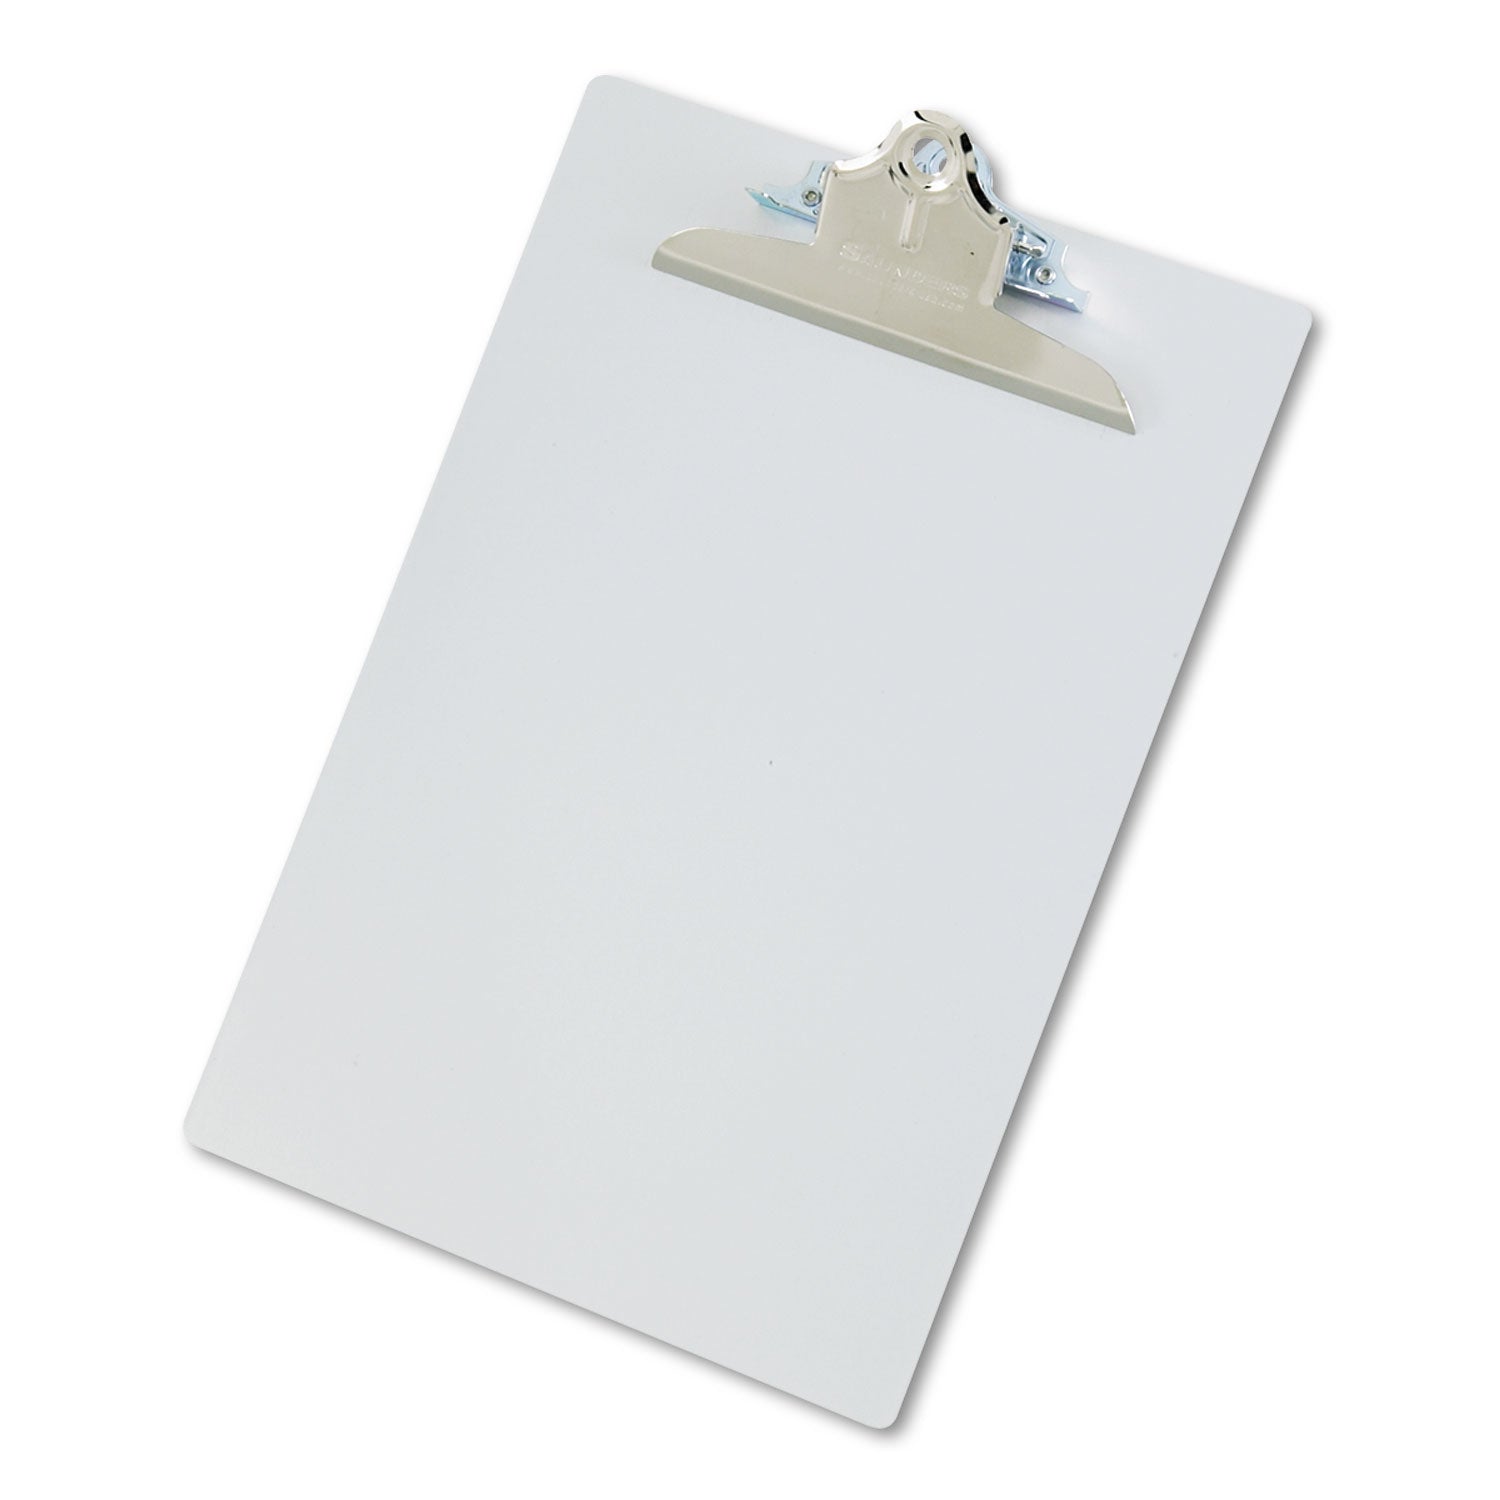 Recycled Aluminum Clipboard with High-Capacity Clip, 1" Clip Capacity, Holds 8.5 x 11 Sheets, Silver - 